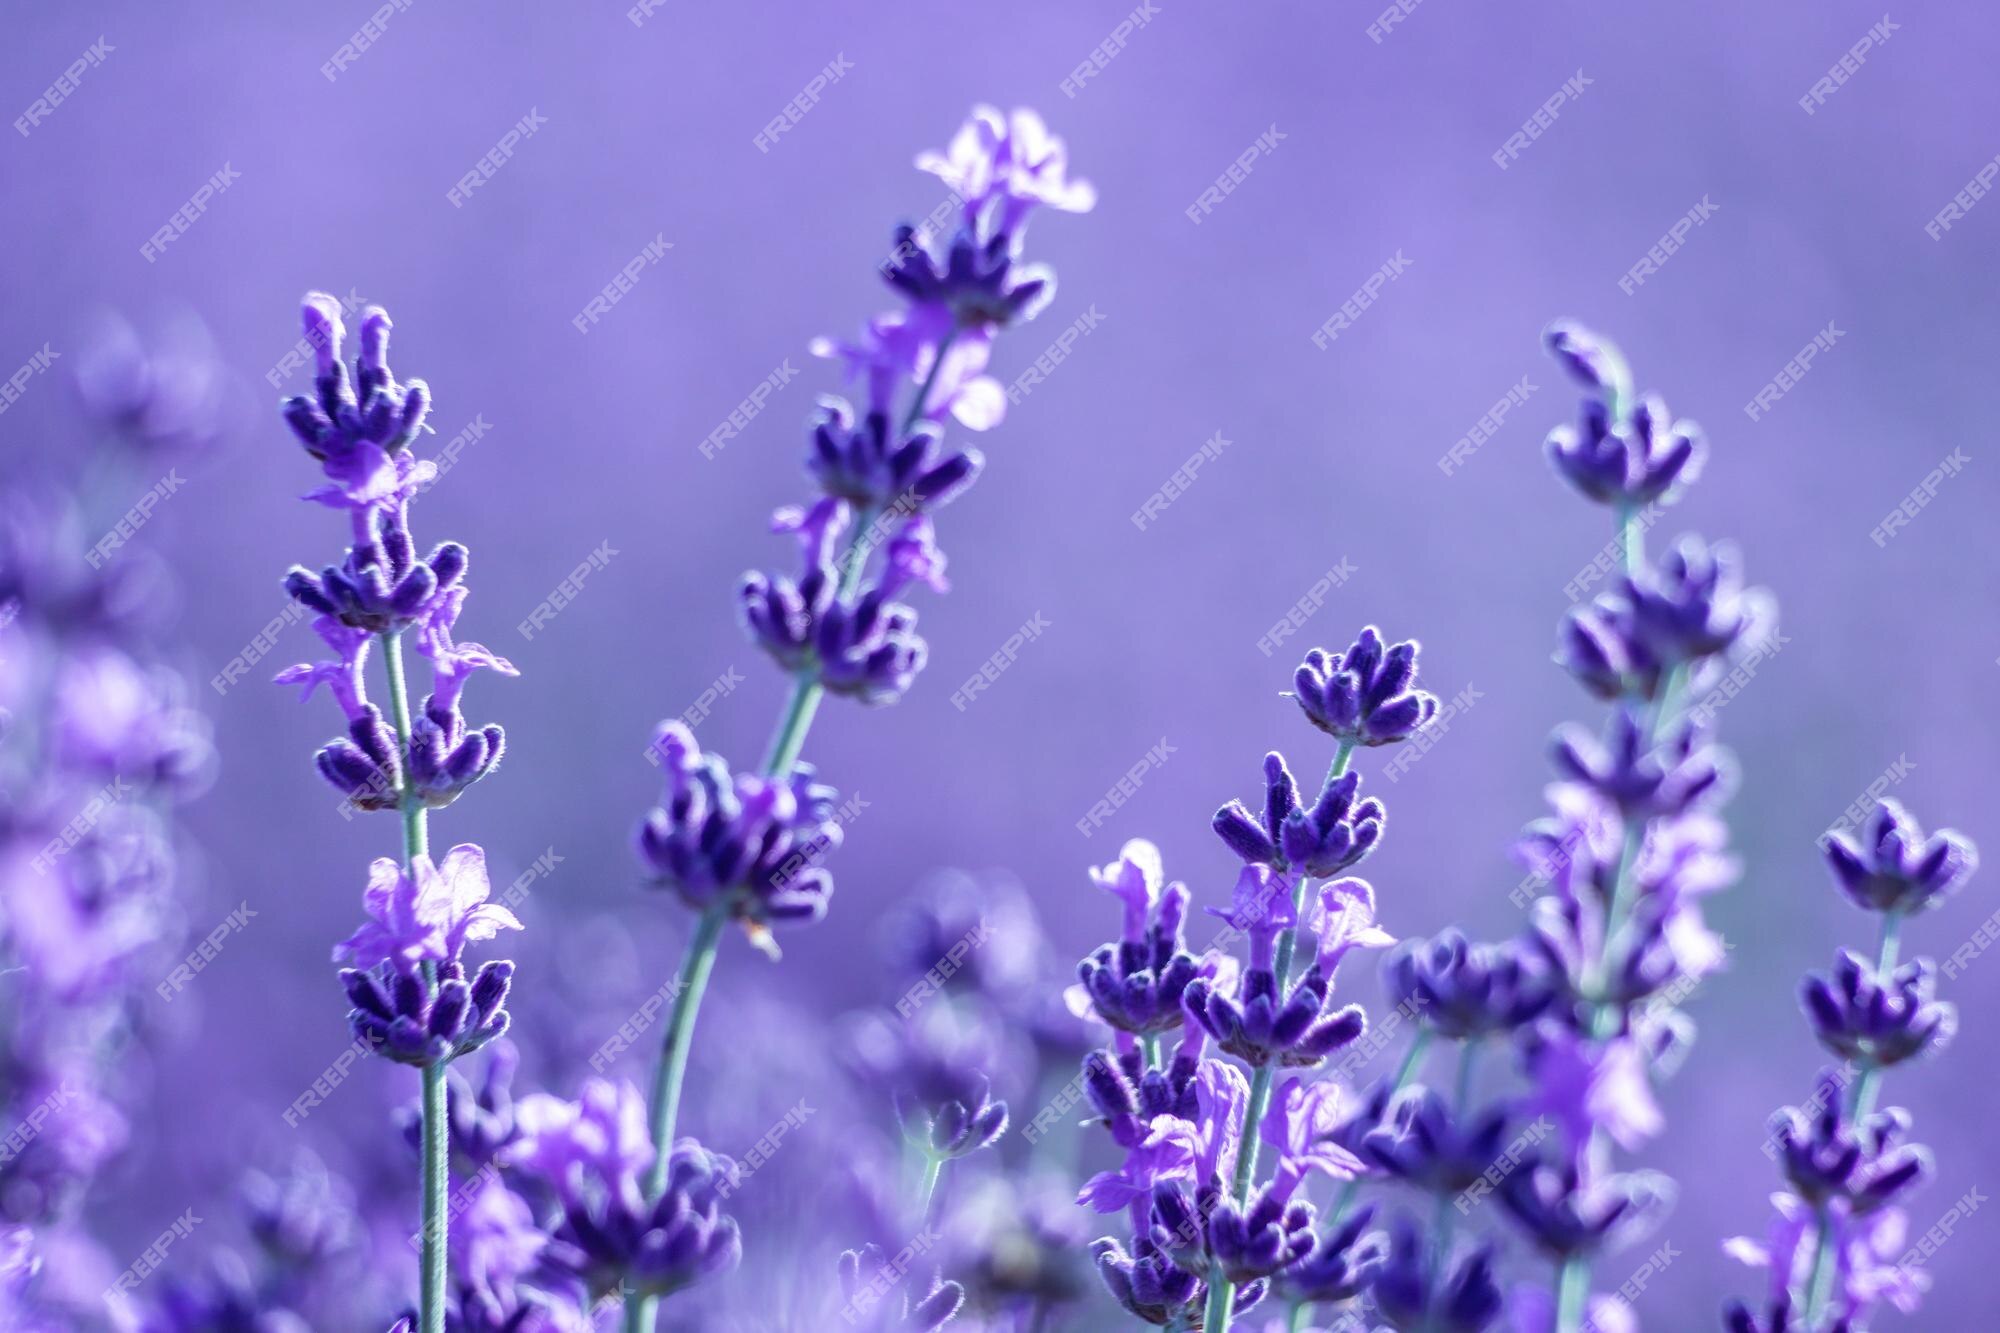 Premium Photo | Lavender flower background with beautiful purple colors and  bokeh lights blooming lavender in a